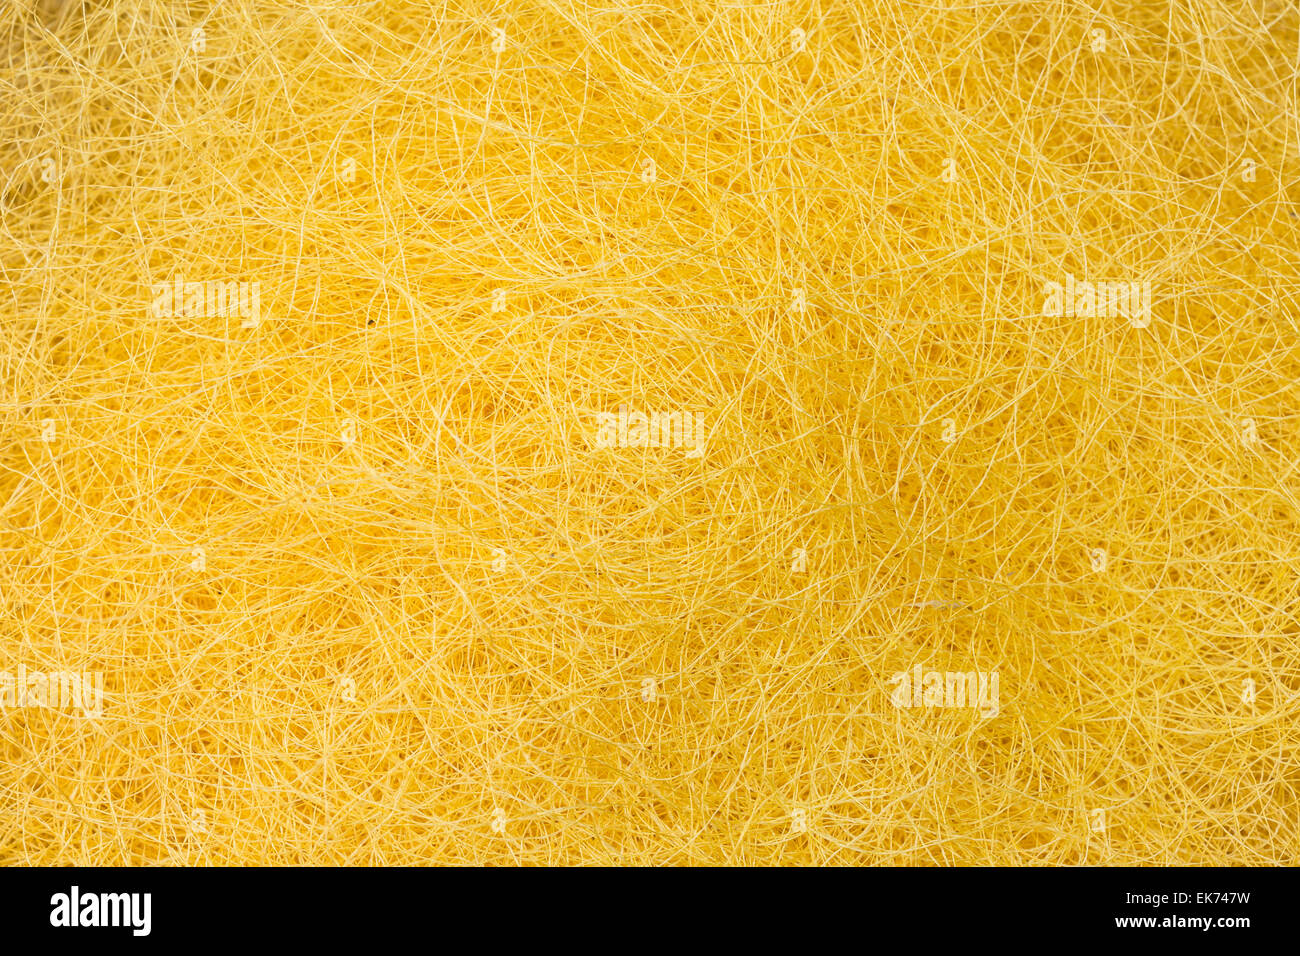 silk yarn from yellow cocoons of the silk worm Stock Photo